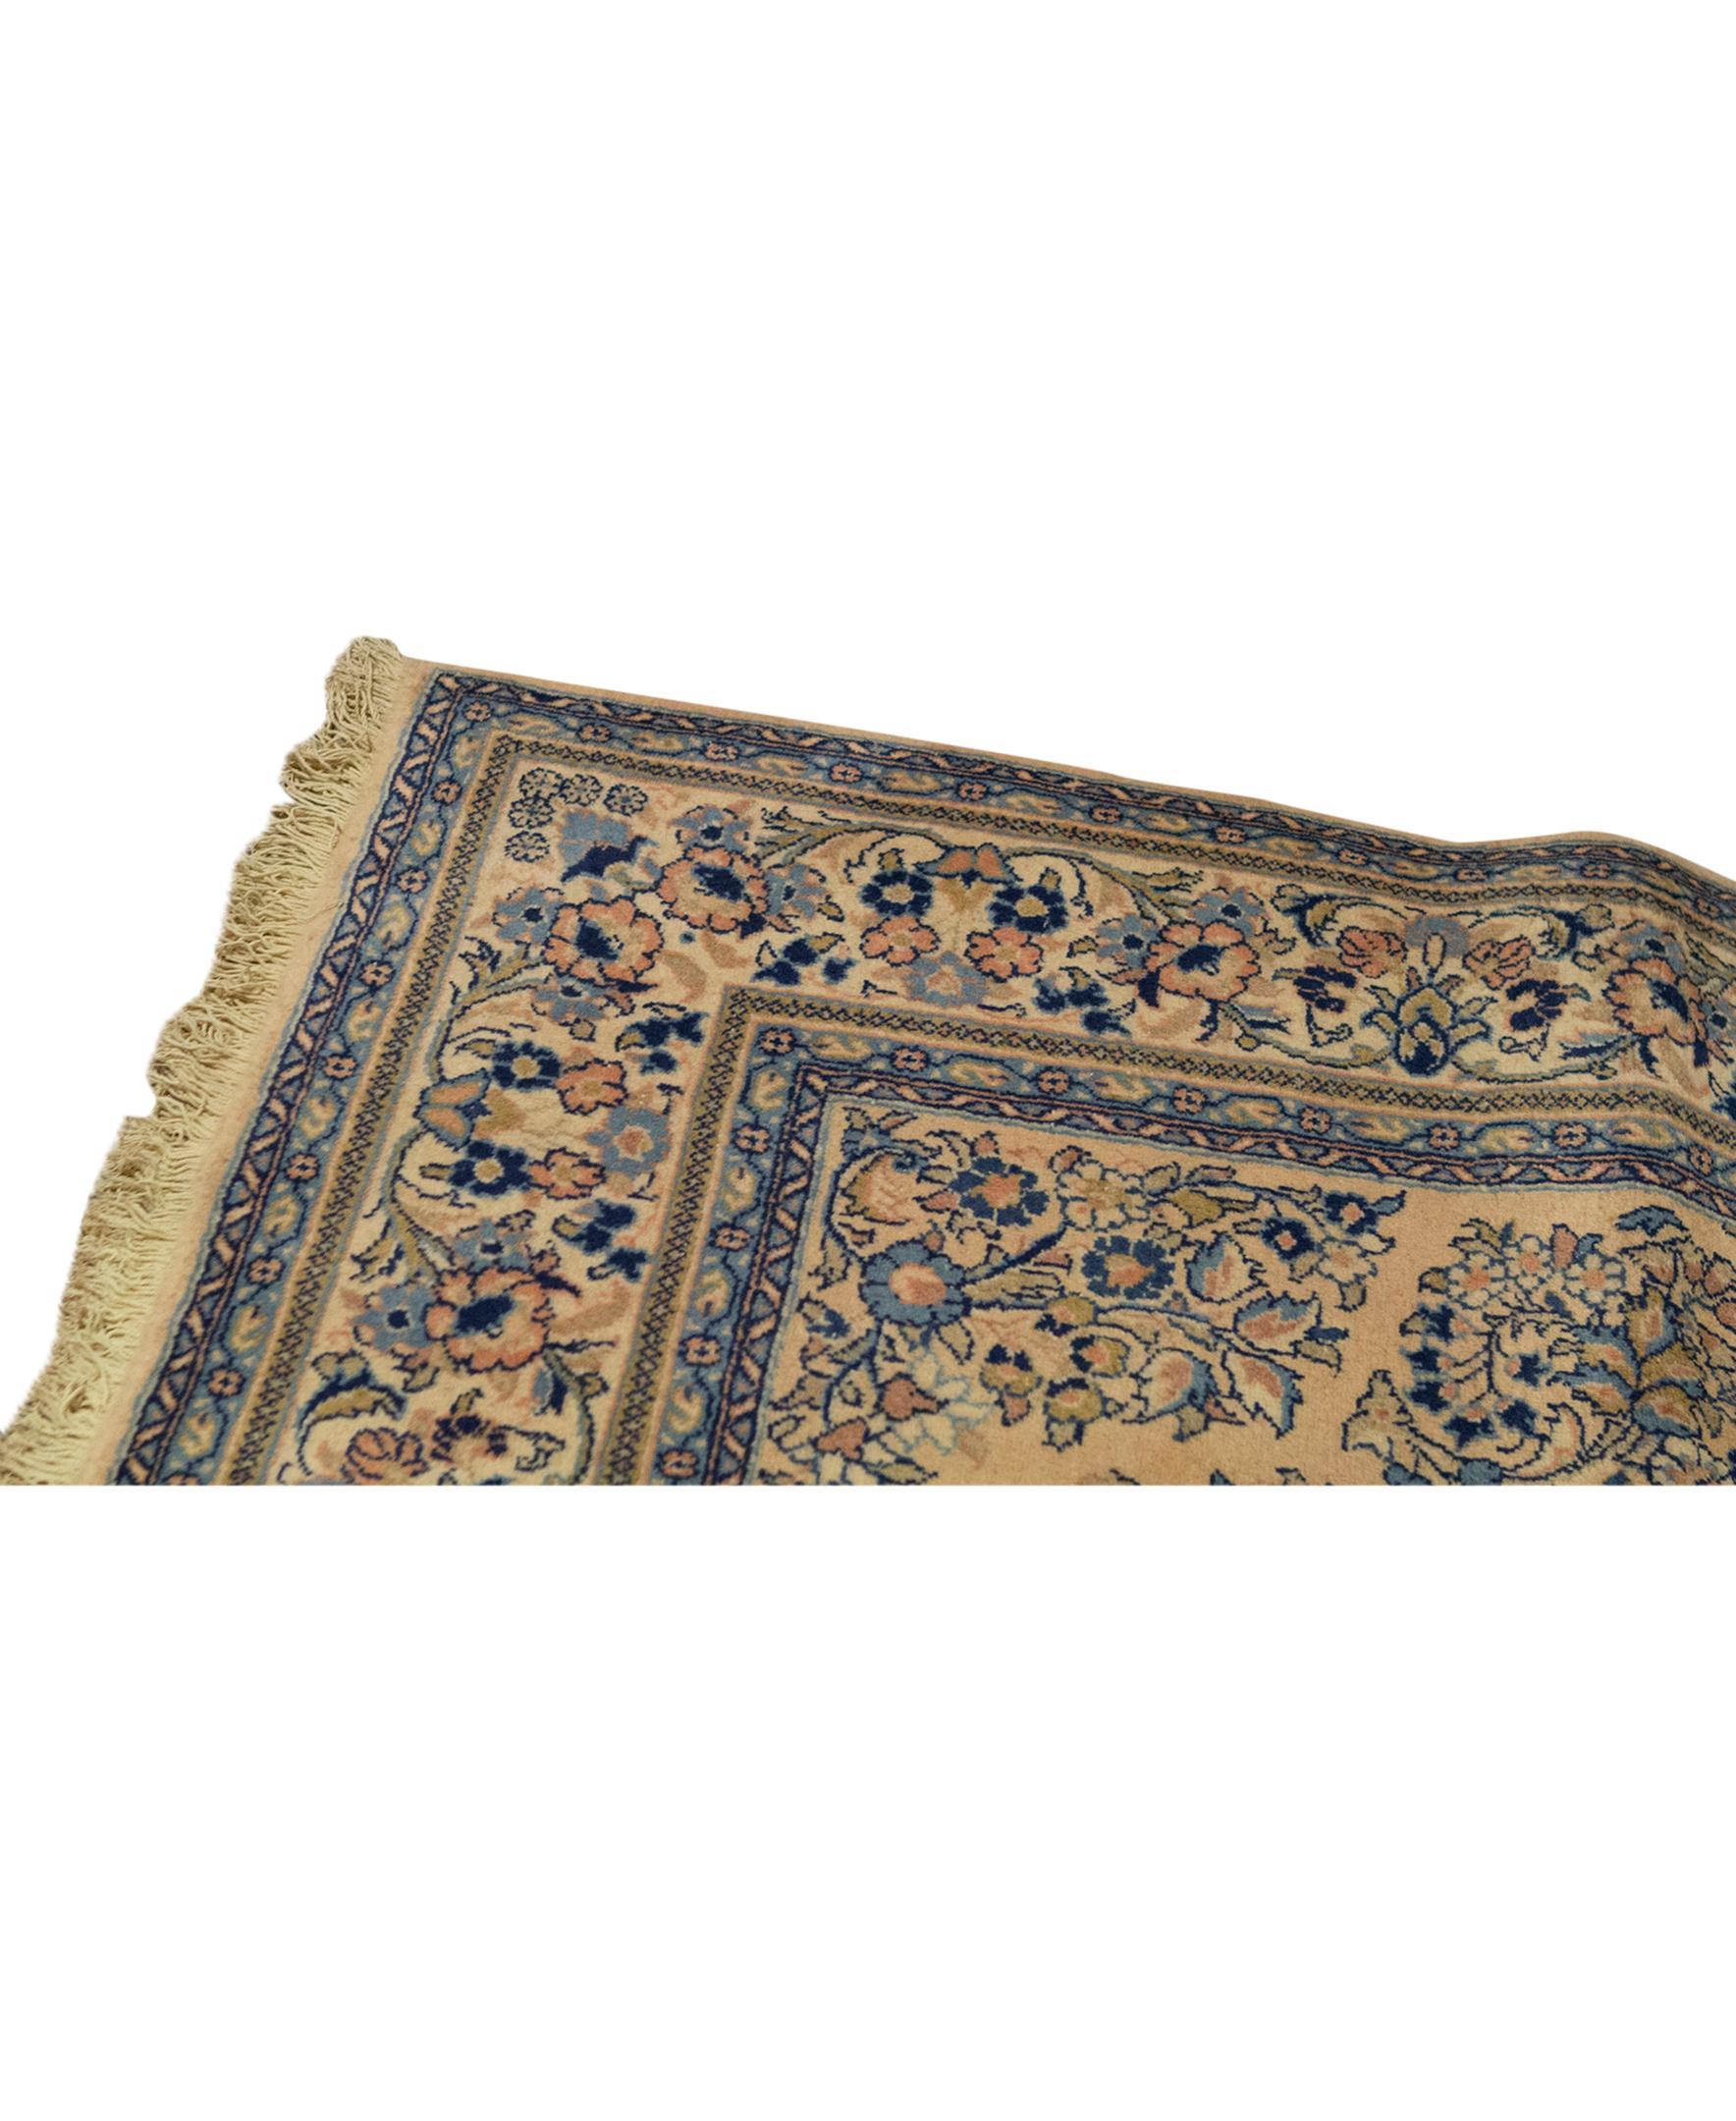   Antique Persian Fine Traditional Handwoven Luxury Wool Ivory / Blue Rug. Size: 9'-8